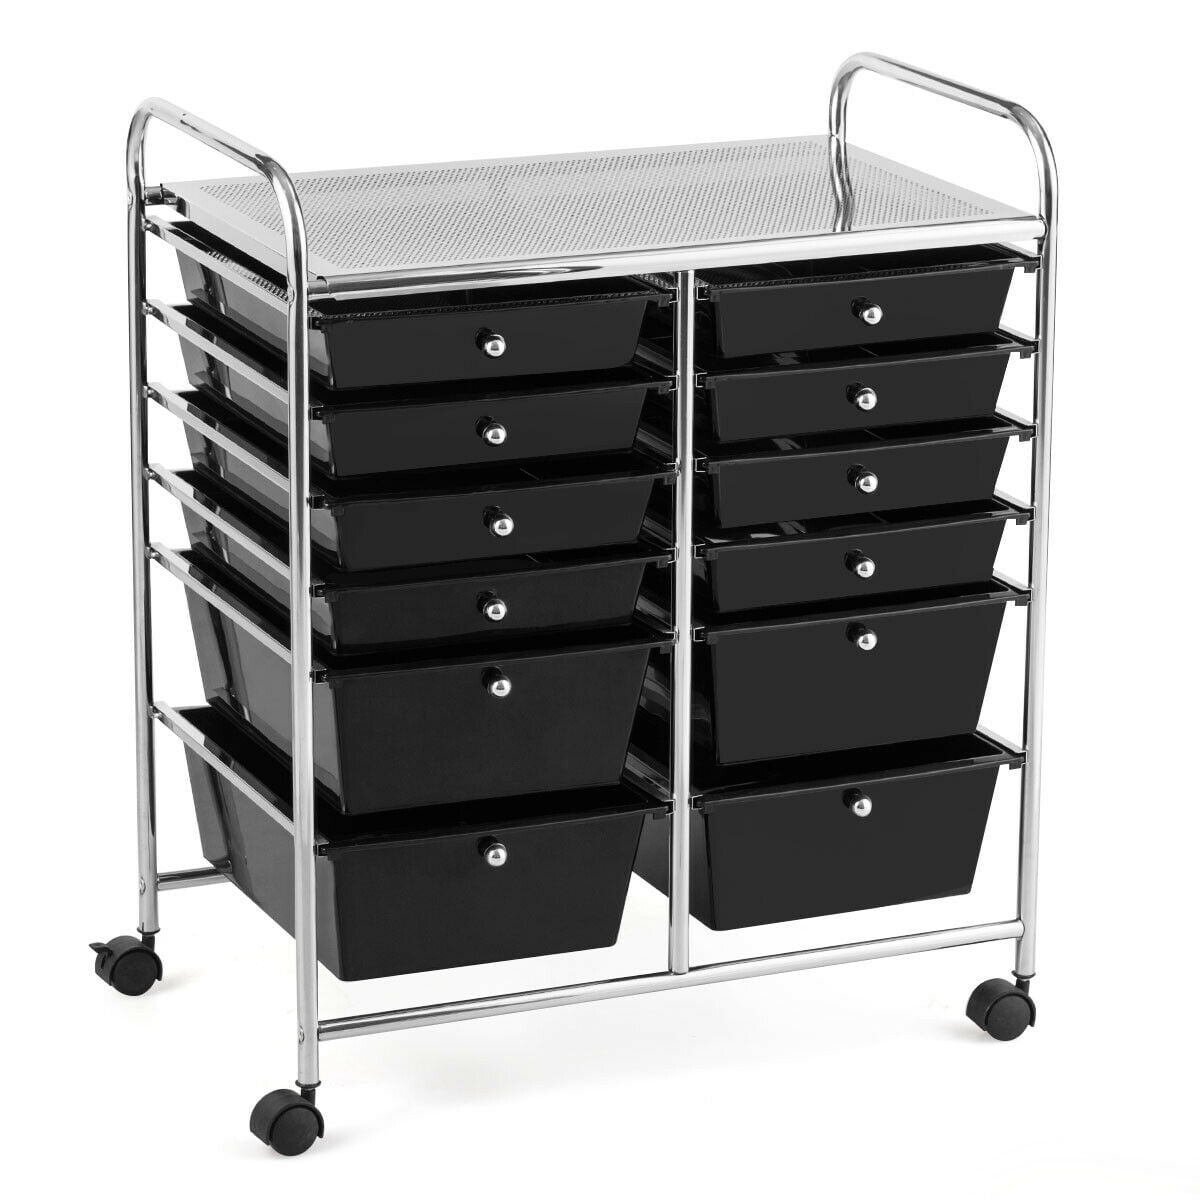 Black WELLFOR 10 Drawer Rolling Storage Cart Tools Scrapbook Stationery Mobile Rolling Storage with Tray Cart Office School Home Organizer